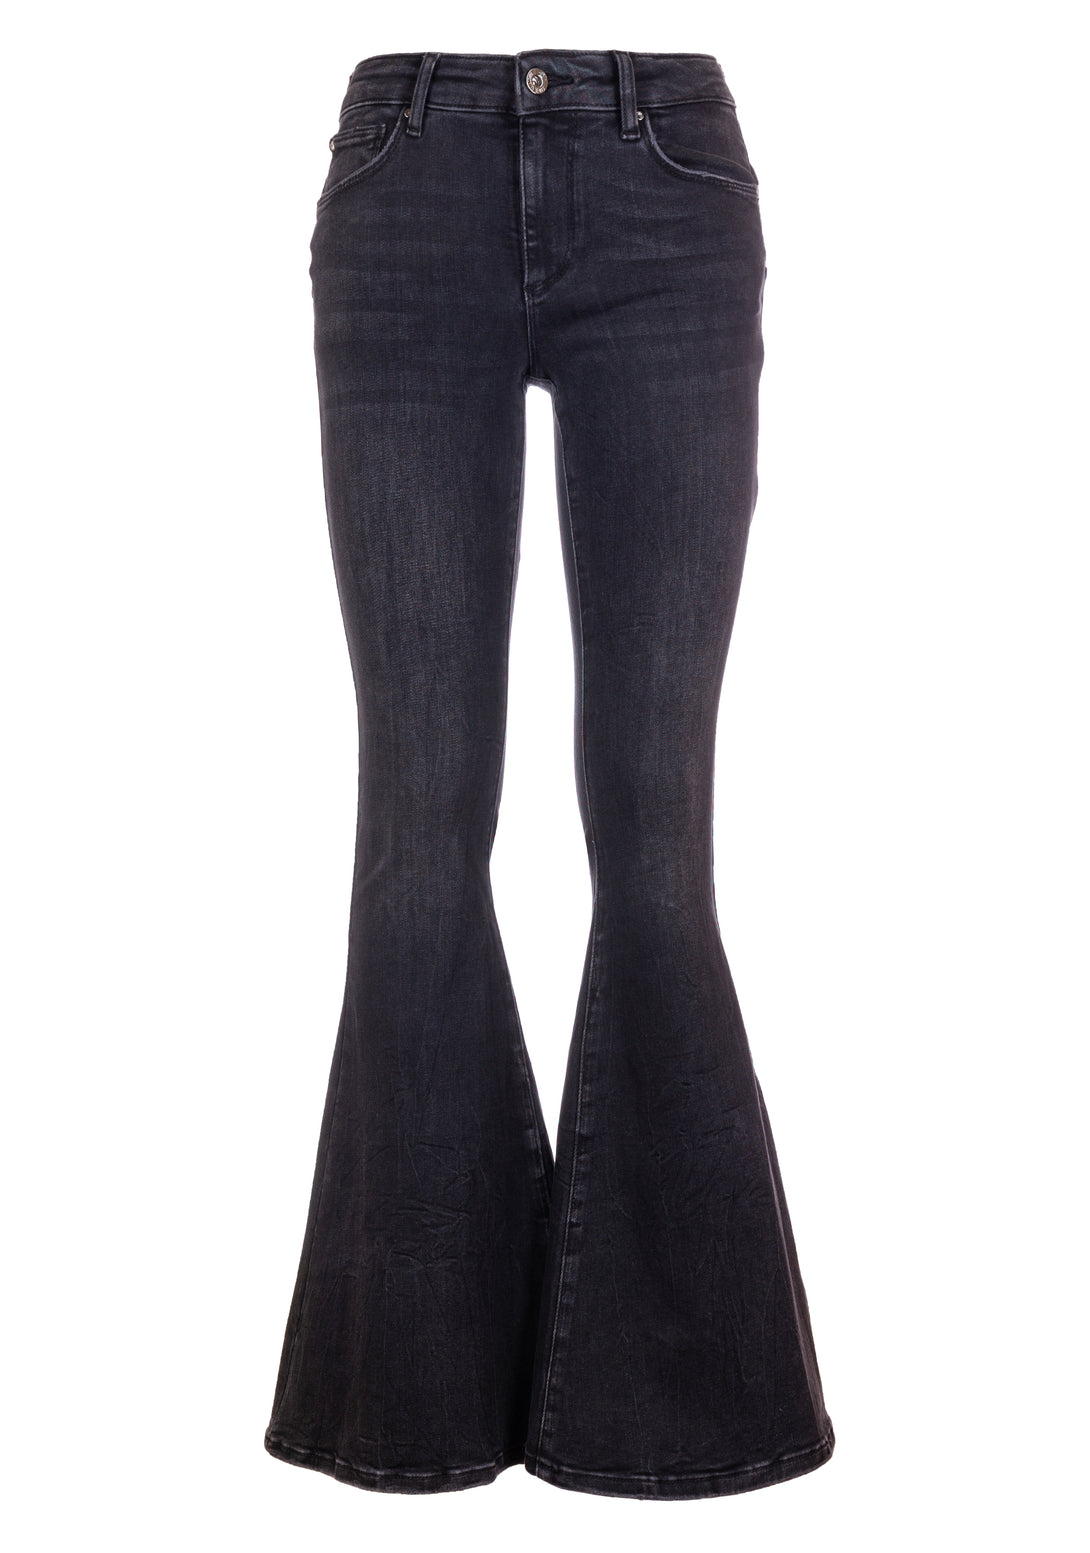 Jeans flare with push up effect made in black denim with middle wash